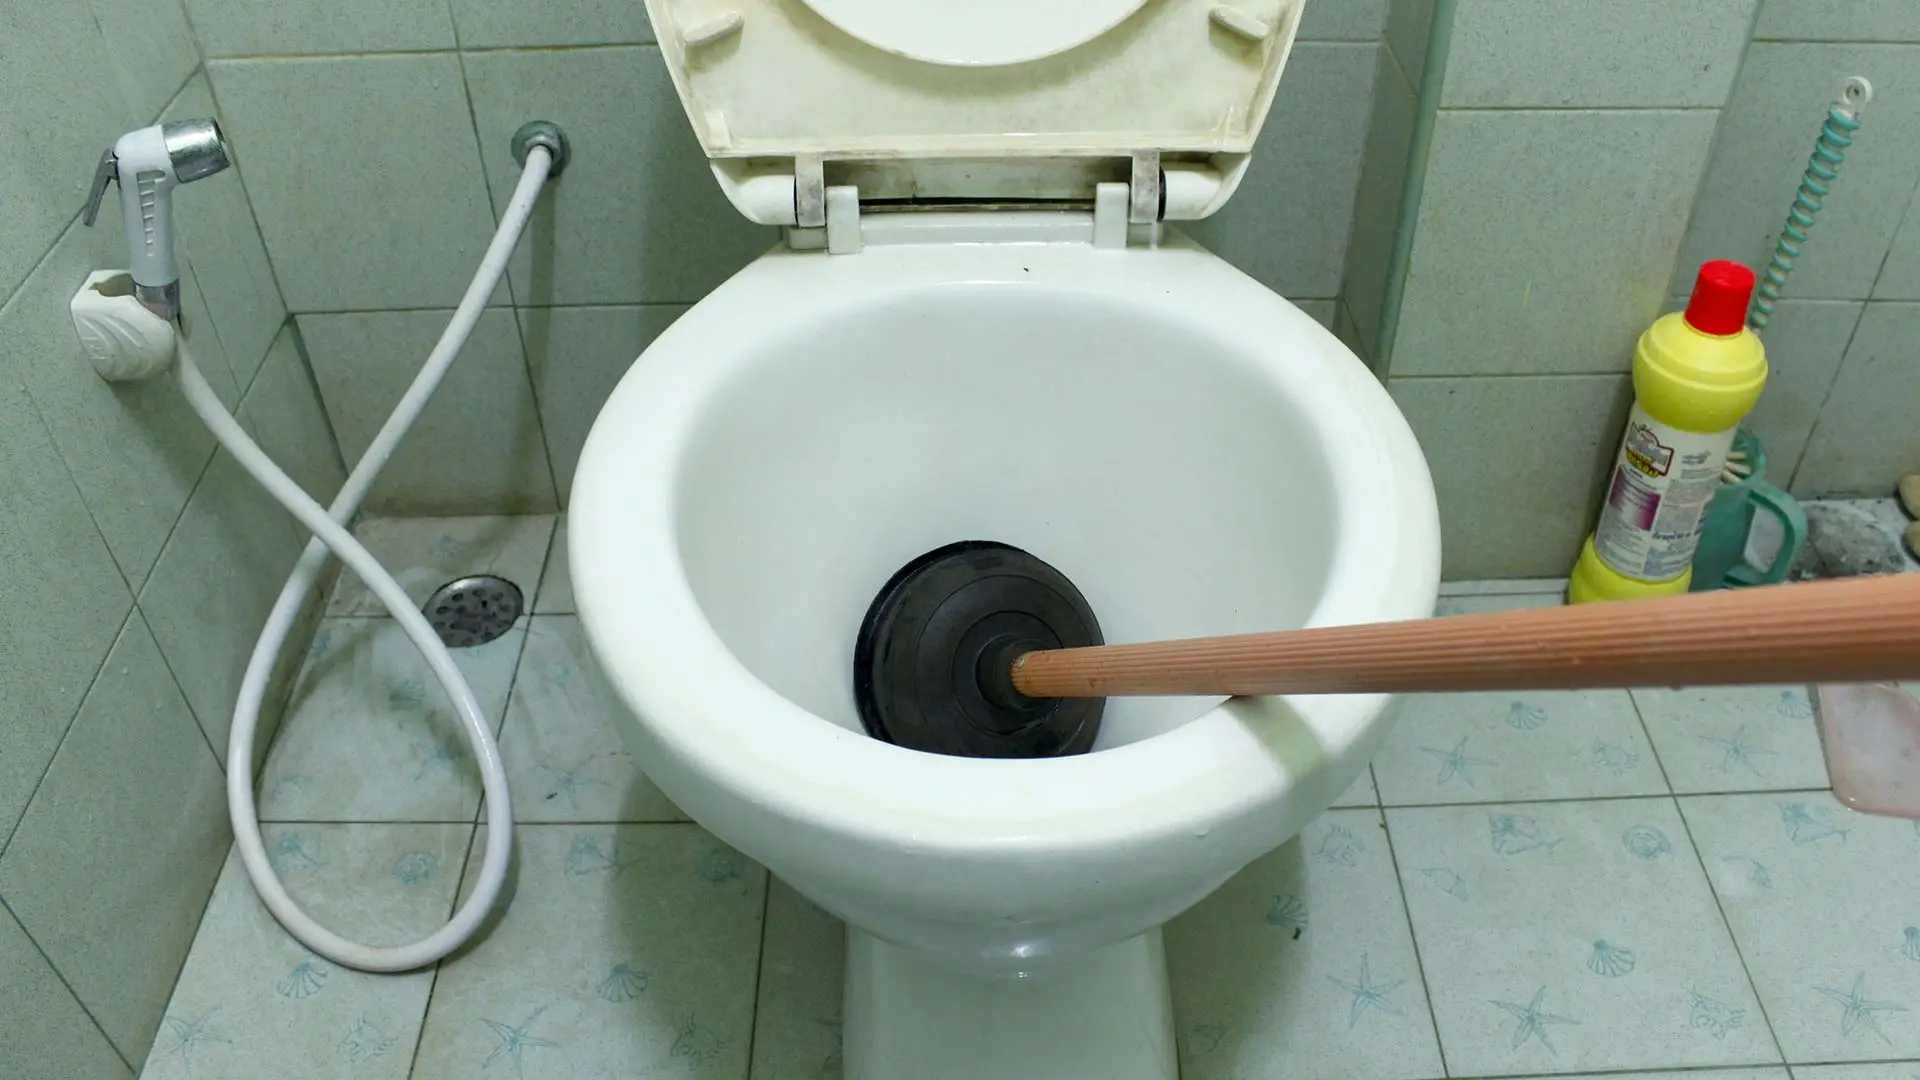 What Should You Do If Your Toilet Overflows?